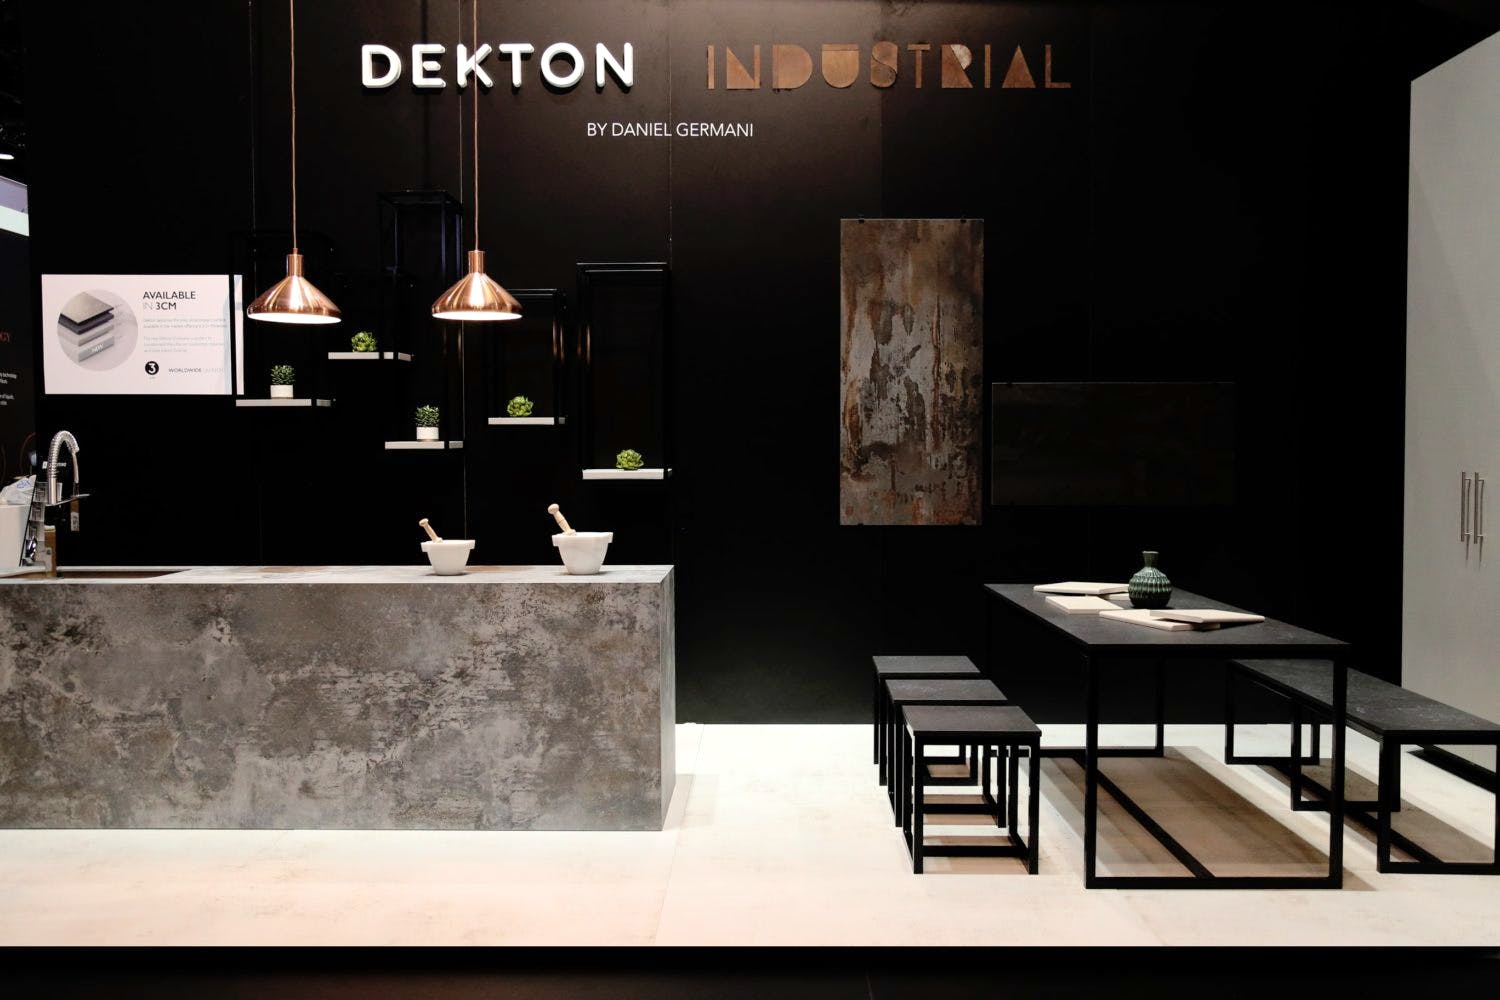 Image of Dekton Industrial Stand Cosentino KBIS 2018 lr 1500x1000 6 in Cosentino's C Magazine is Honoured with the German Silver Architect's Darling Award 2017 - Cosentino